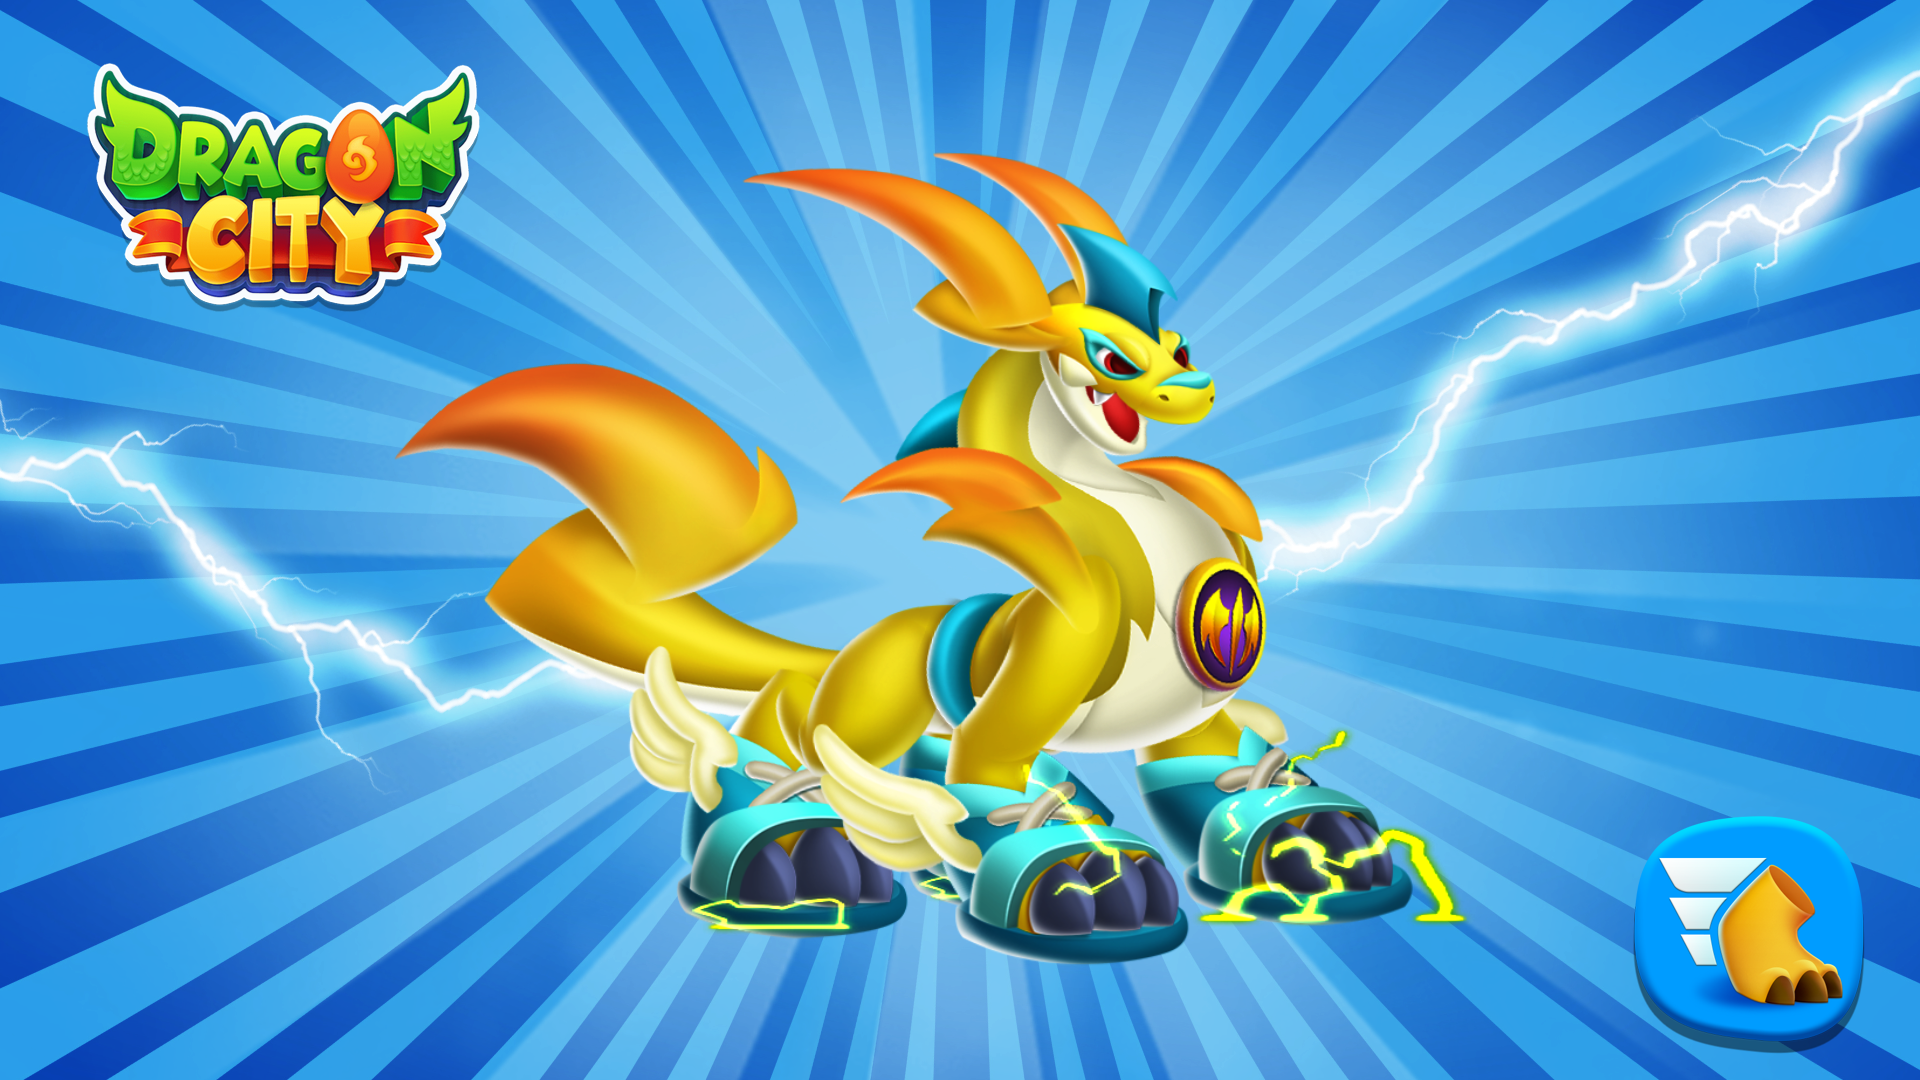 Speed Collection - Capture the Bolt Dragon and his Turbo Skill Skin!